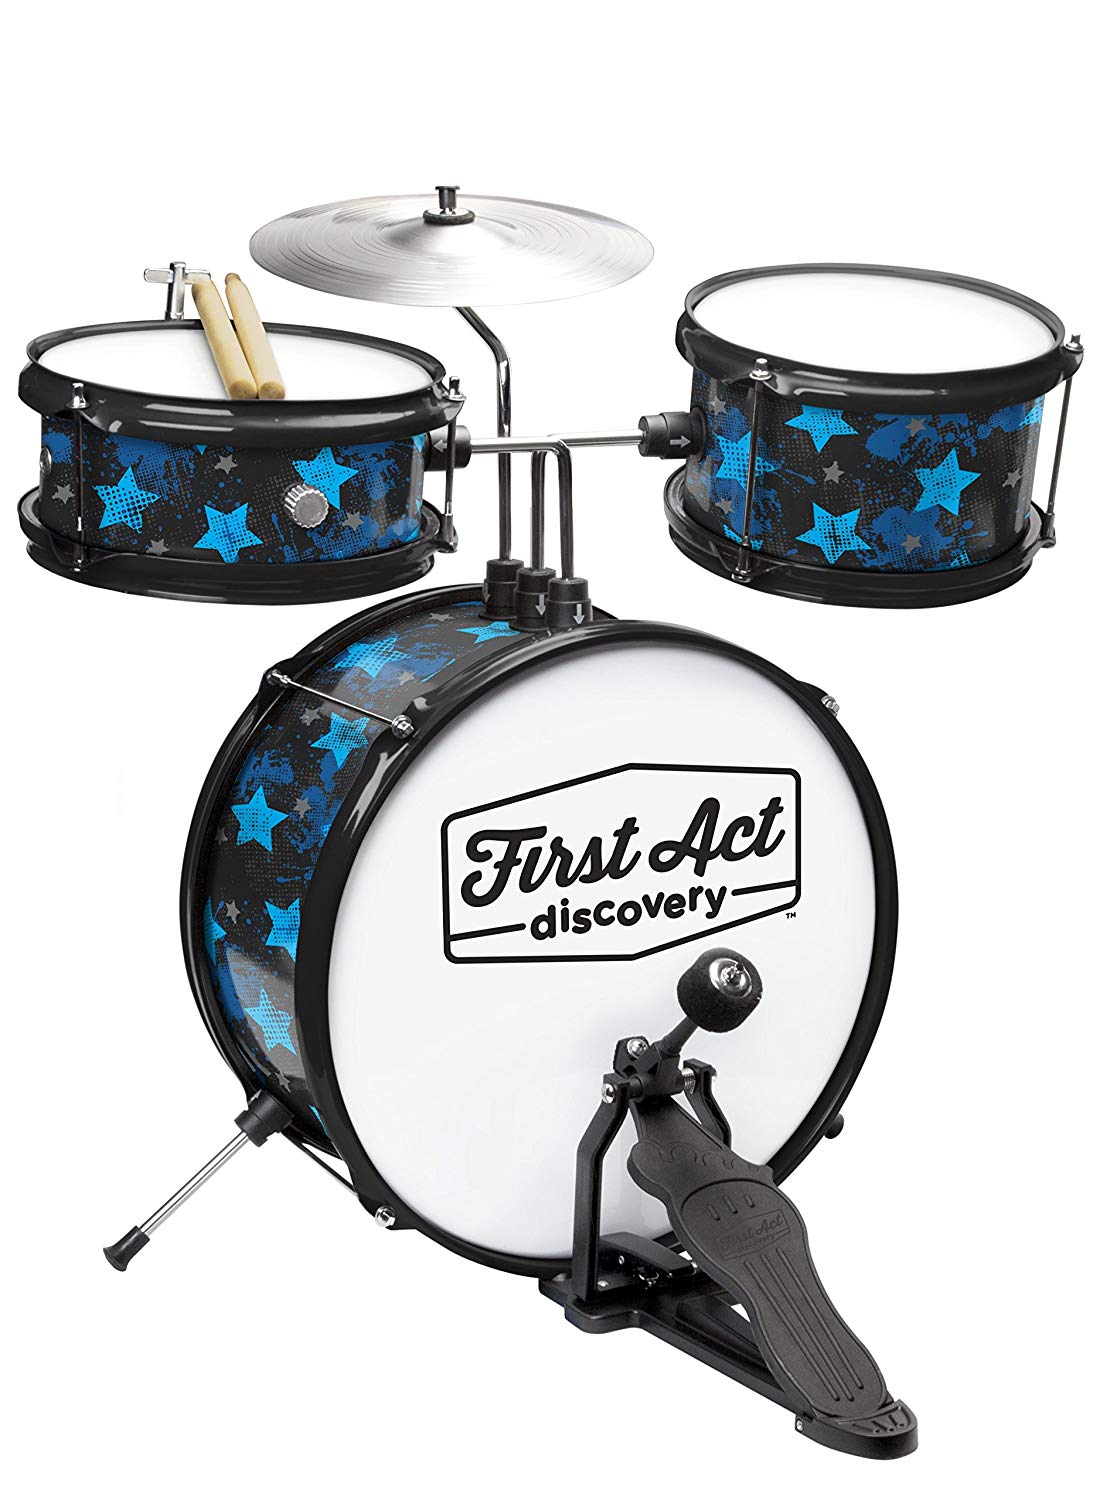 First Act Discovery Drum Set & Seat